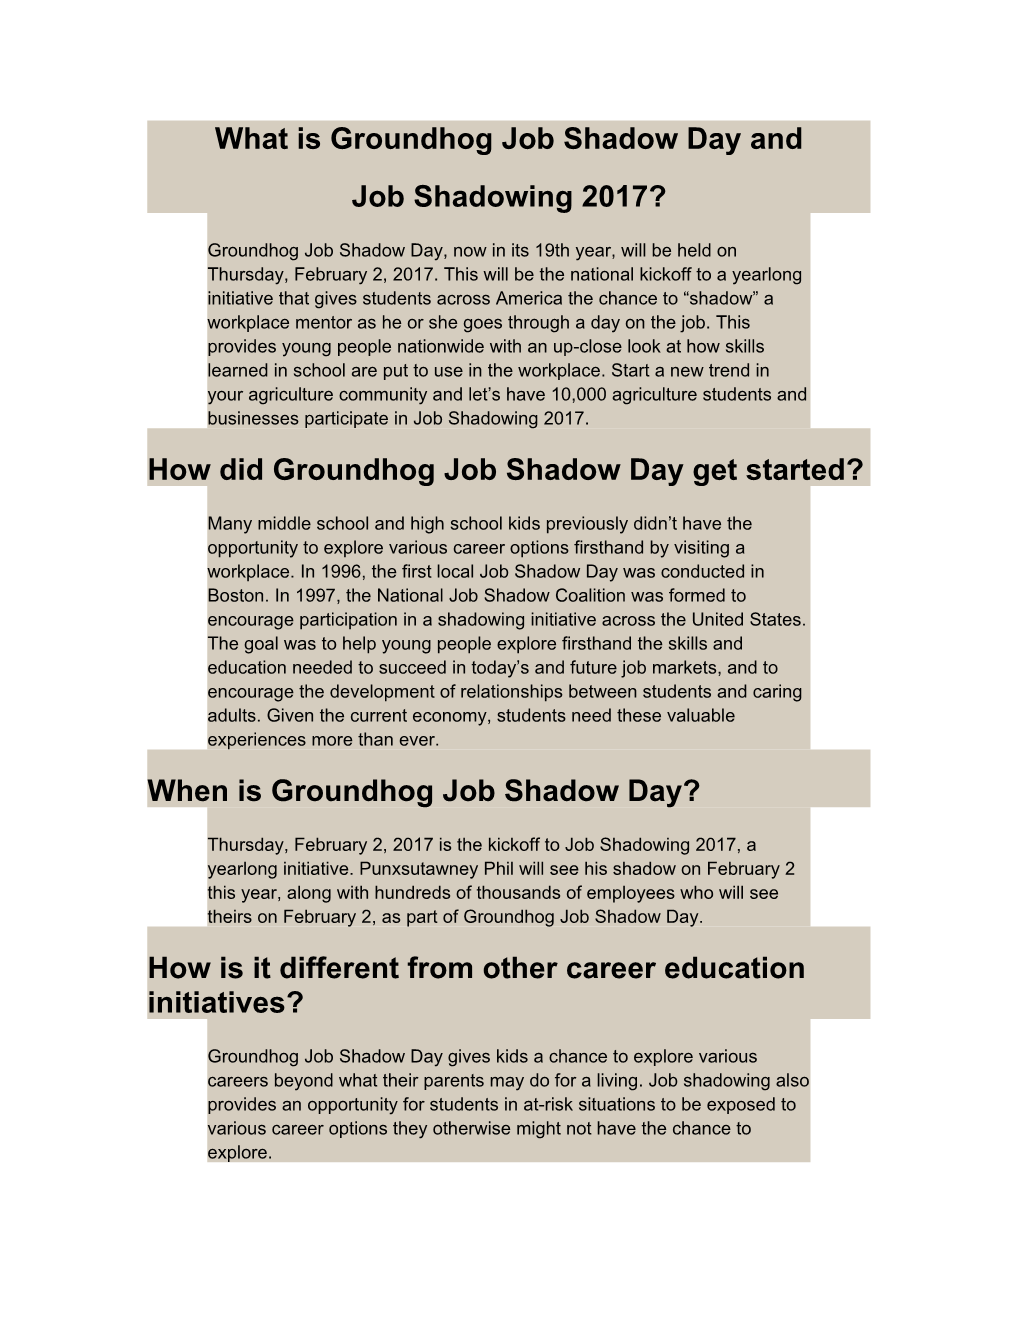 What Is Groundhog Job Shadow Day and Job Shadowing 2006